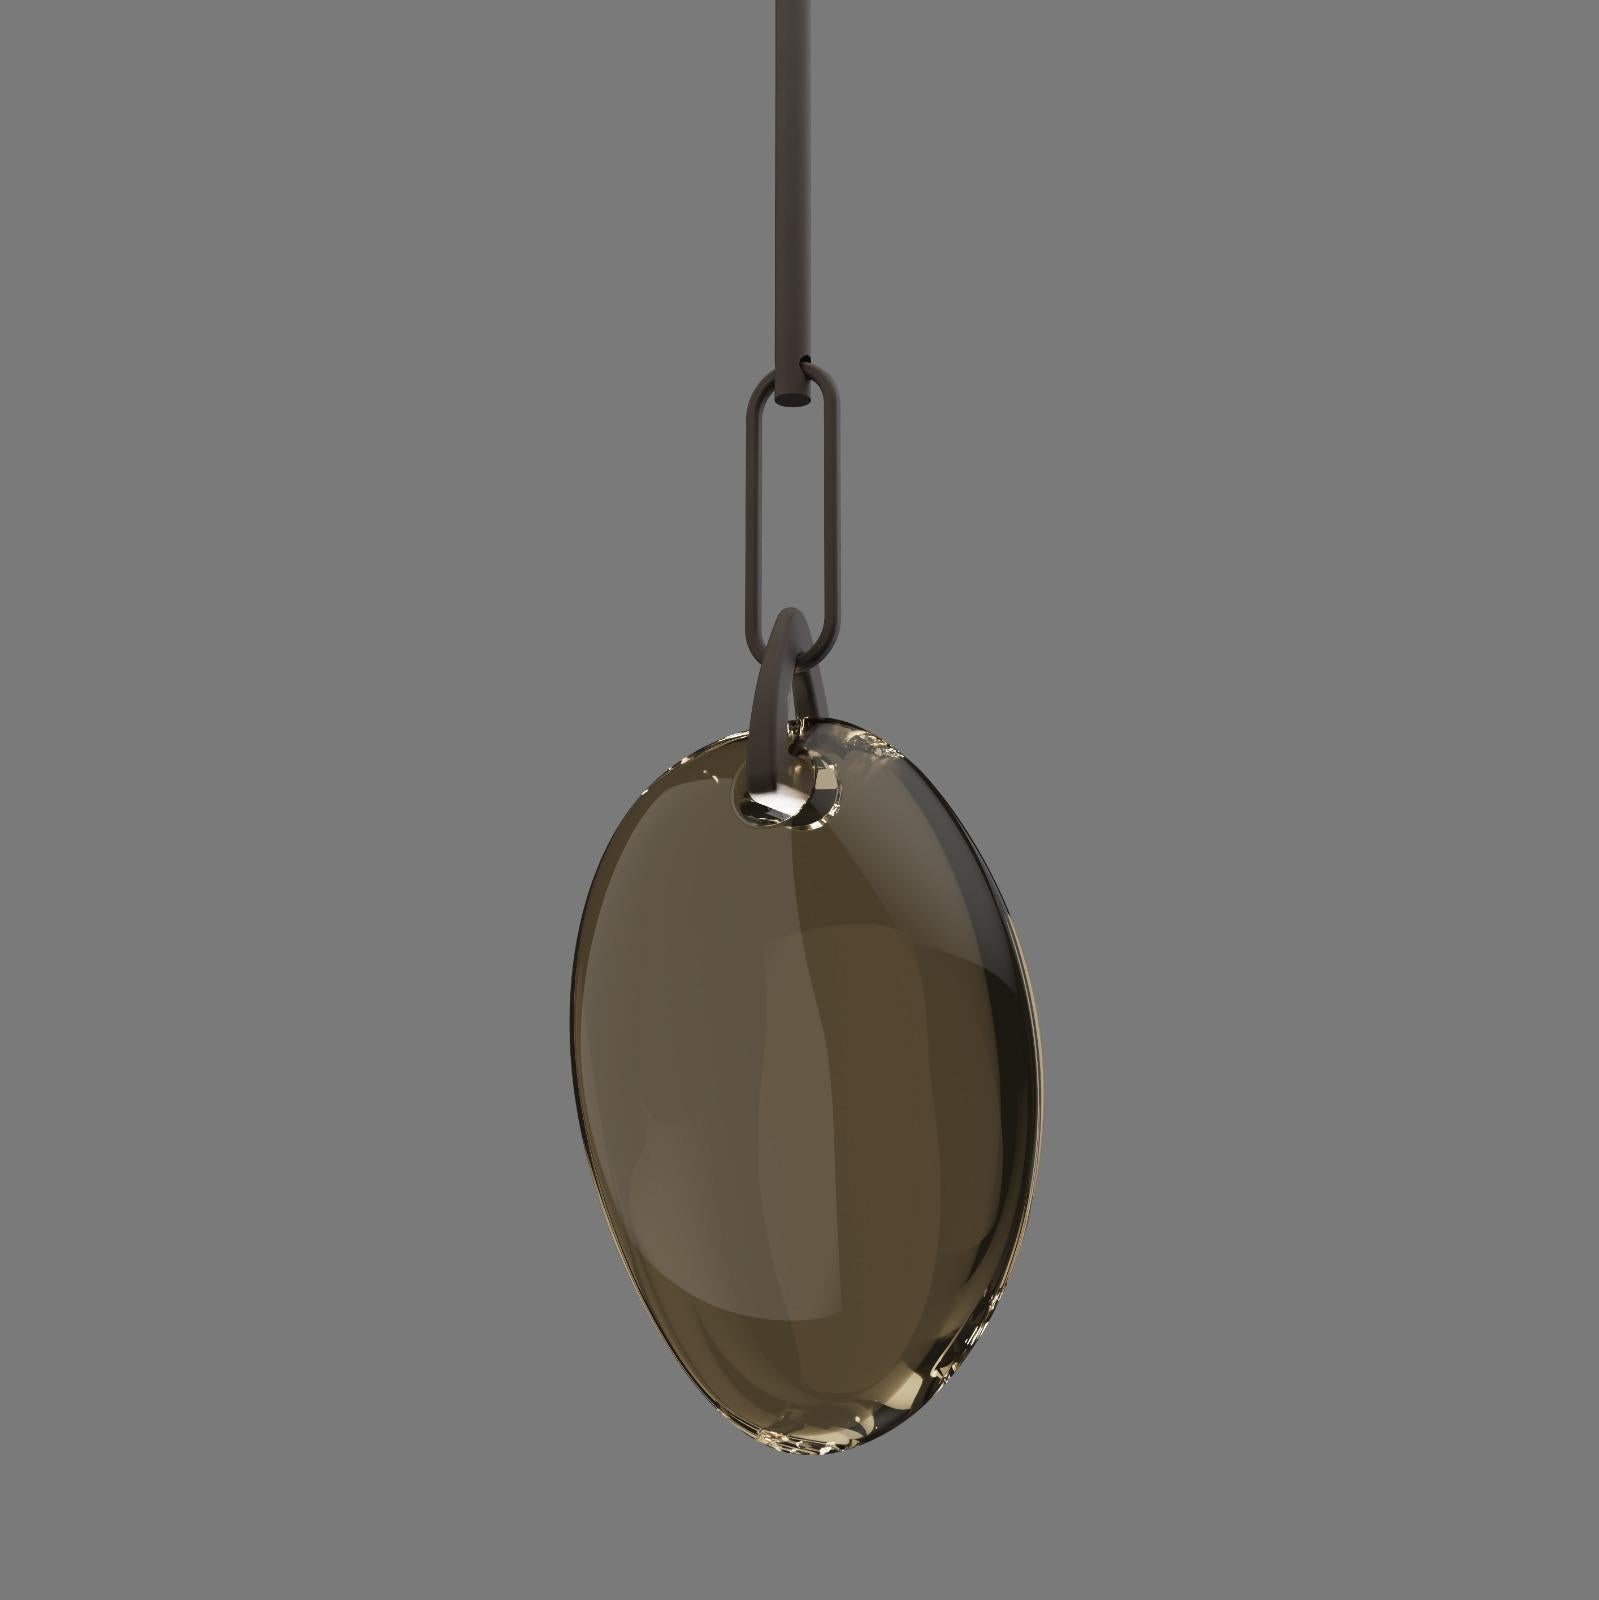 Hand blown glass pendant in bronze coloured glass and metalwork in dark bronze finish. Available in 3 sizes to create stunning clusters or feature fittings.

Finish: antique brass or dark bronze and coloured glass.
Light Source: Integrated LED
Glass